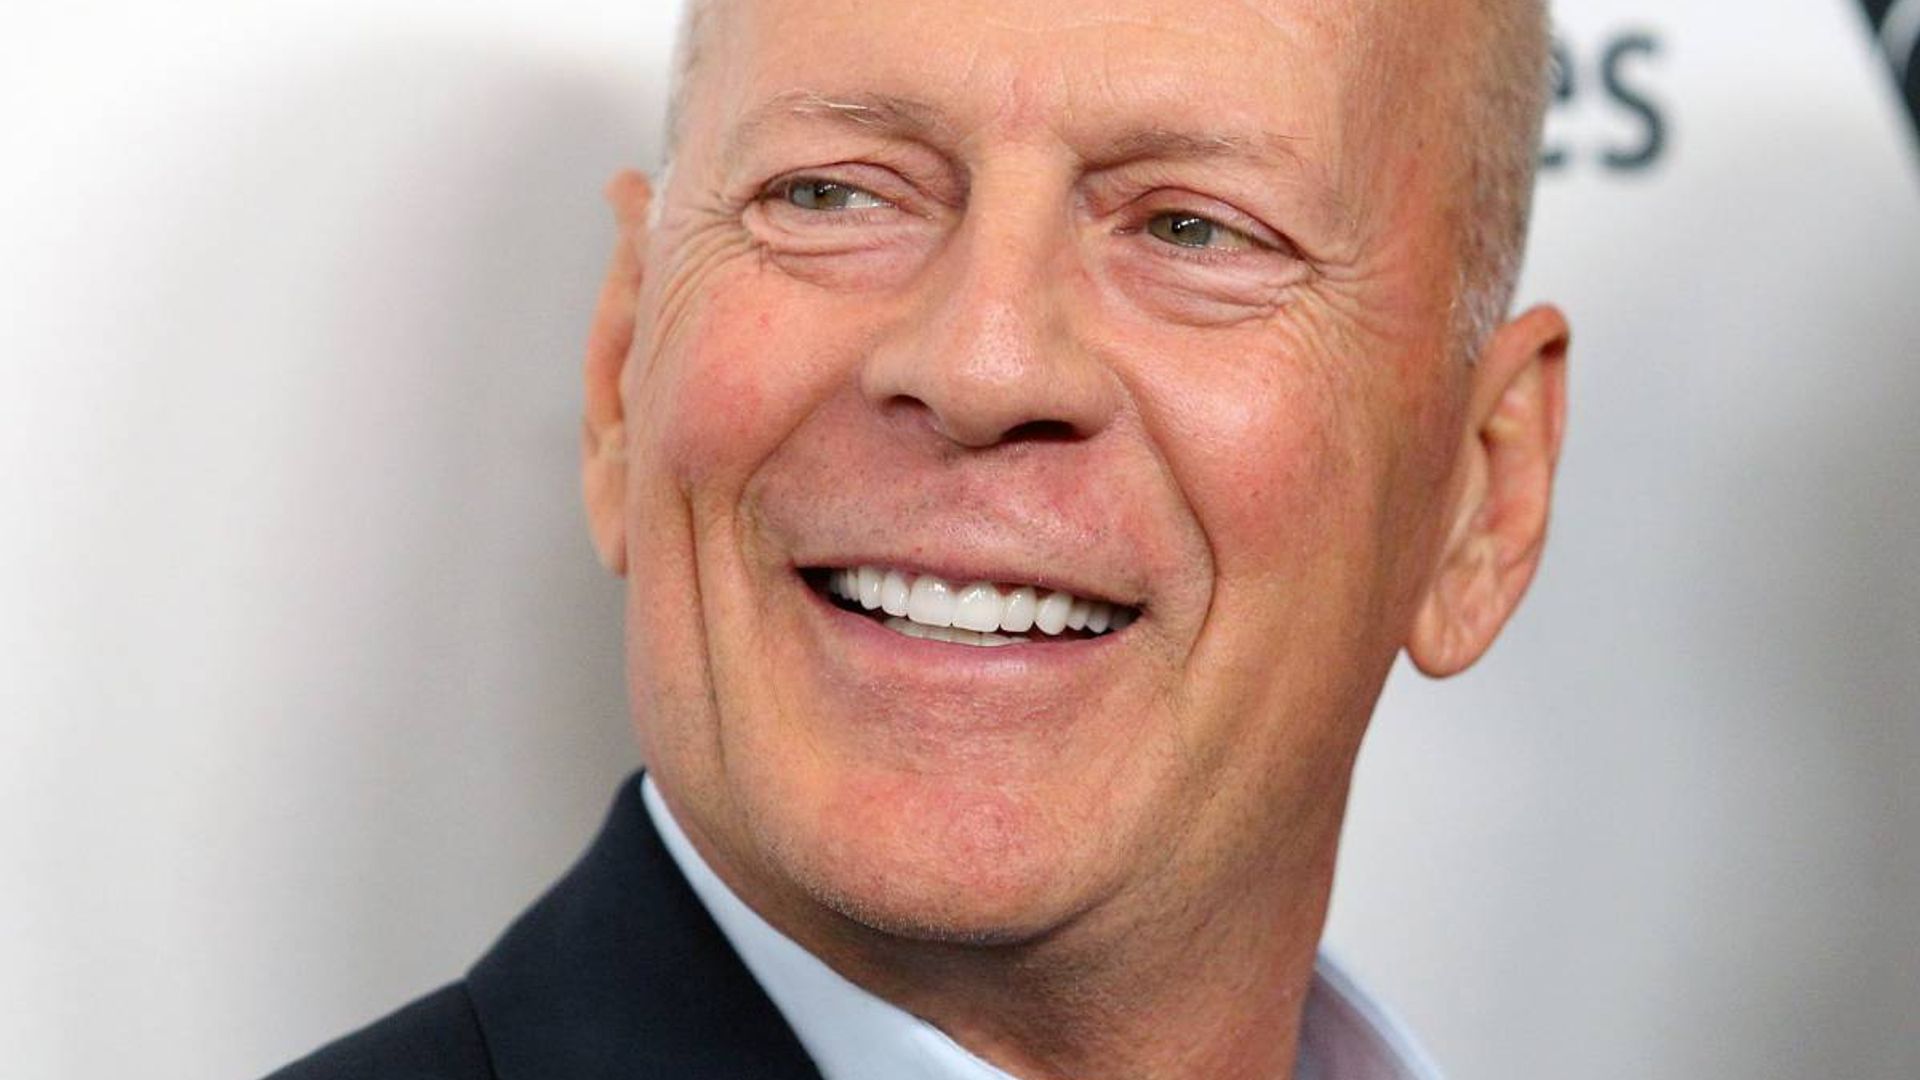 bruce-willis-rare-appearance-loved-up-photo